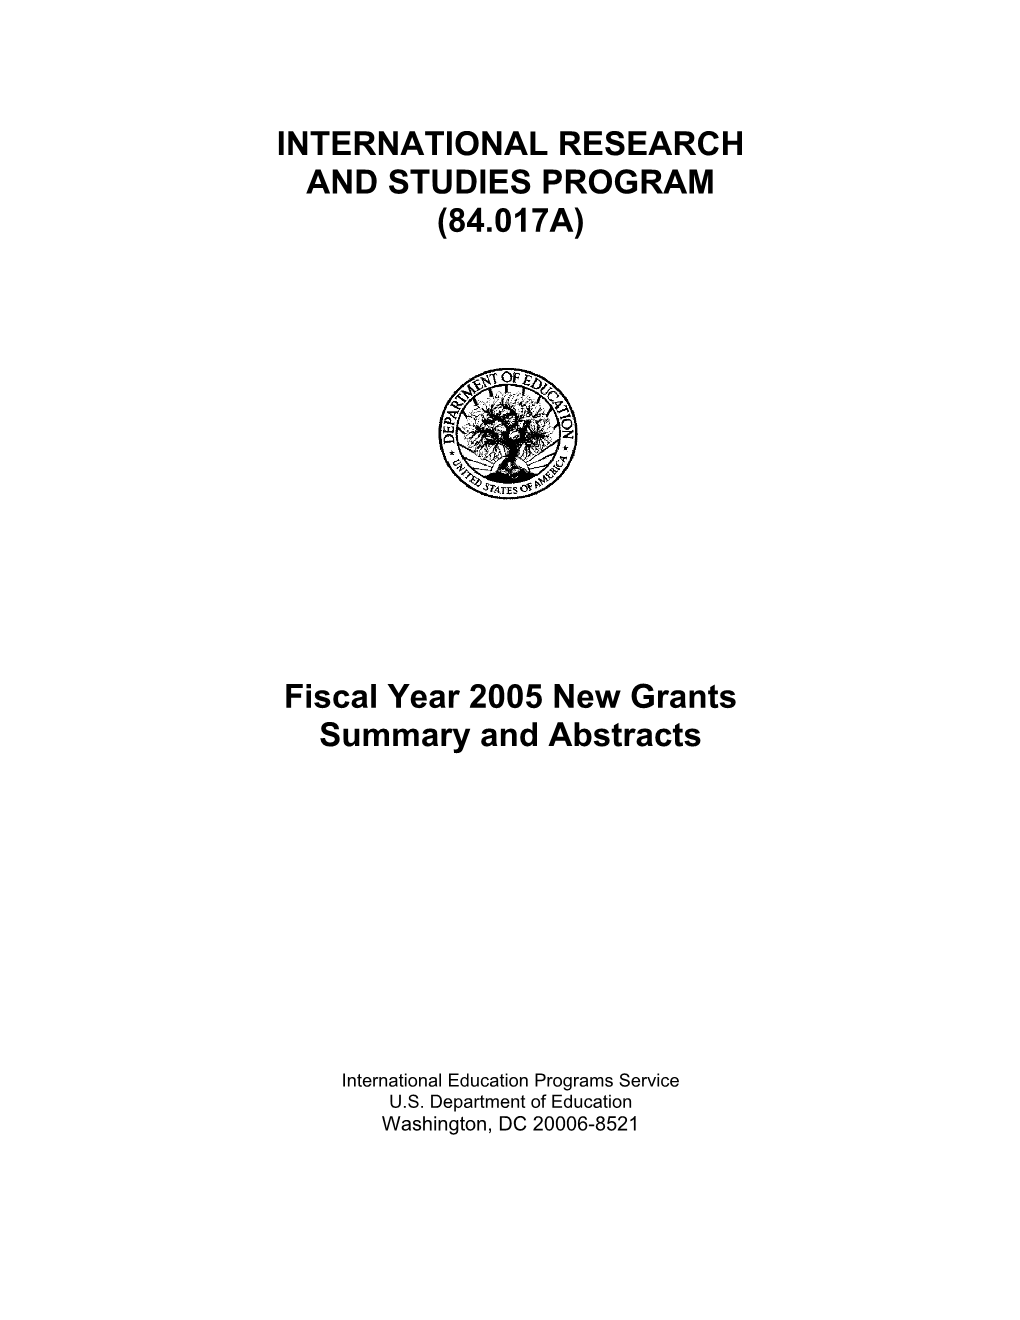 International Research and Studies Program - 2005 Abstracts of Funded Projects (MS Word)